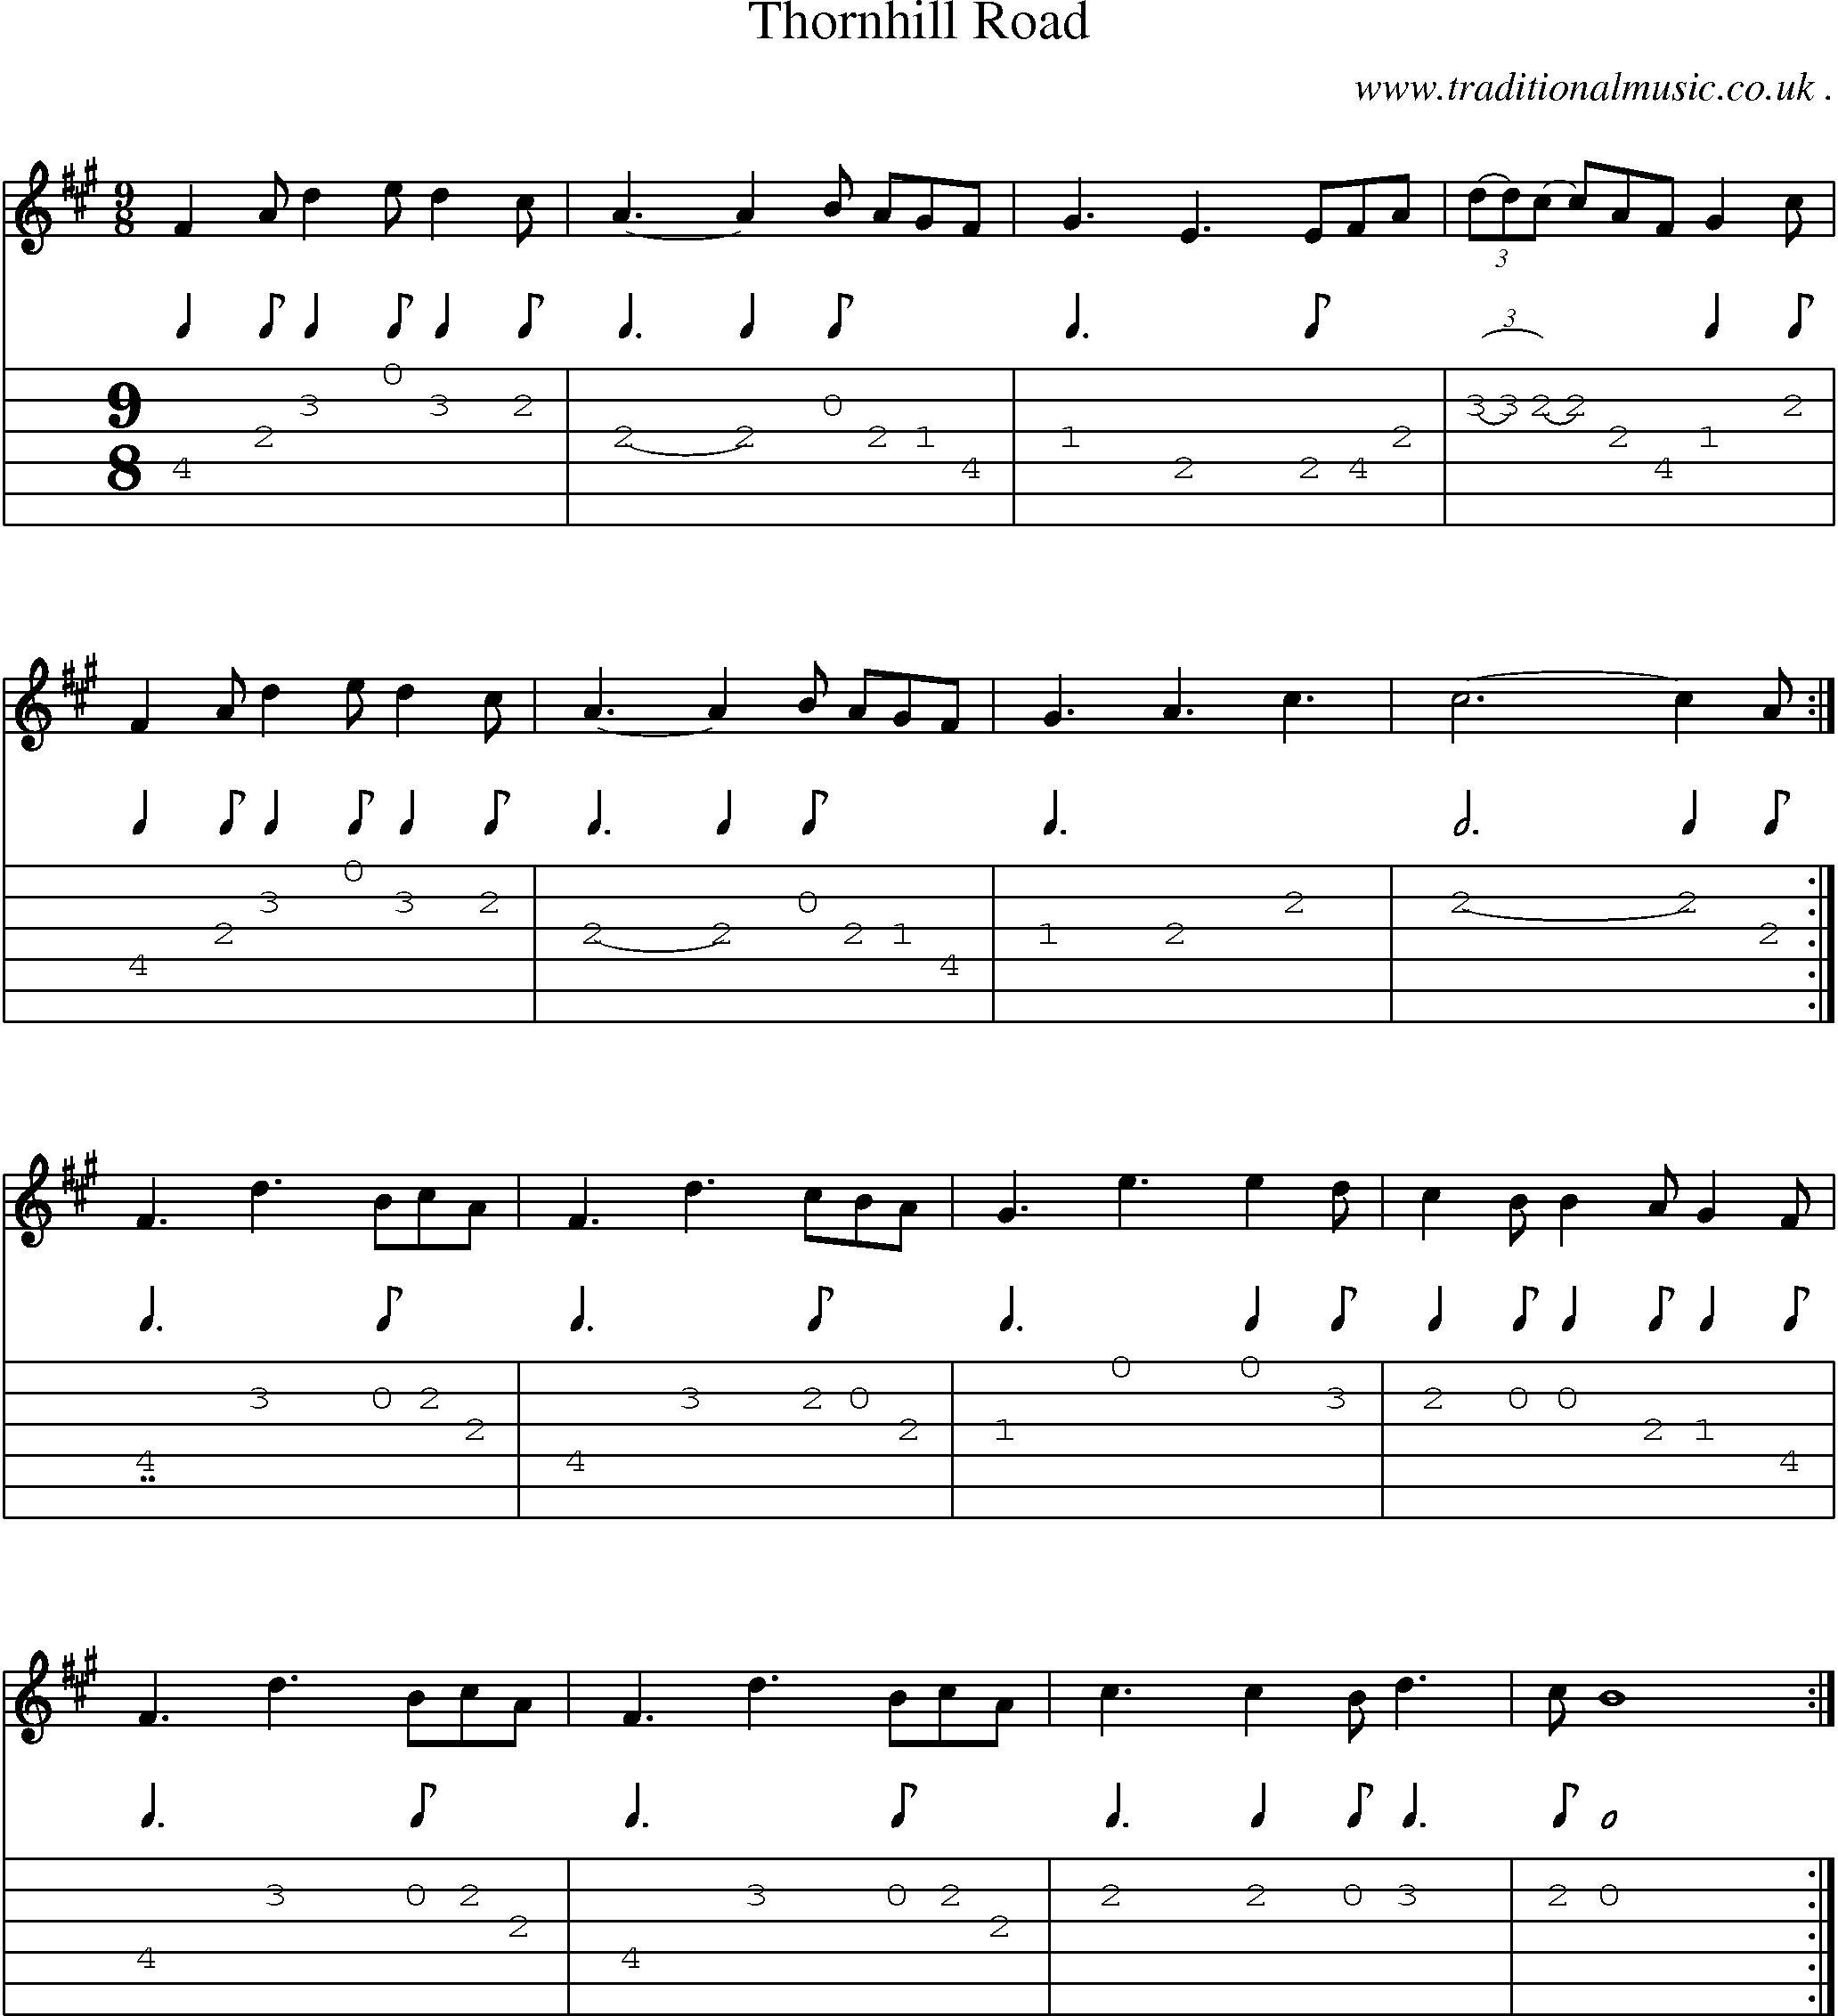 Sheet-Music and Guitar Tabs for Thornhill Road